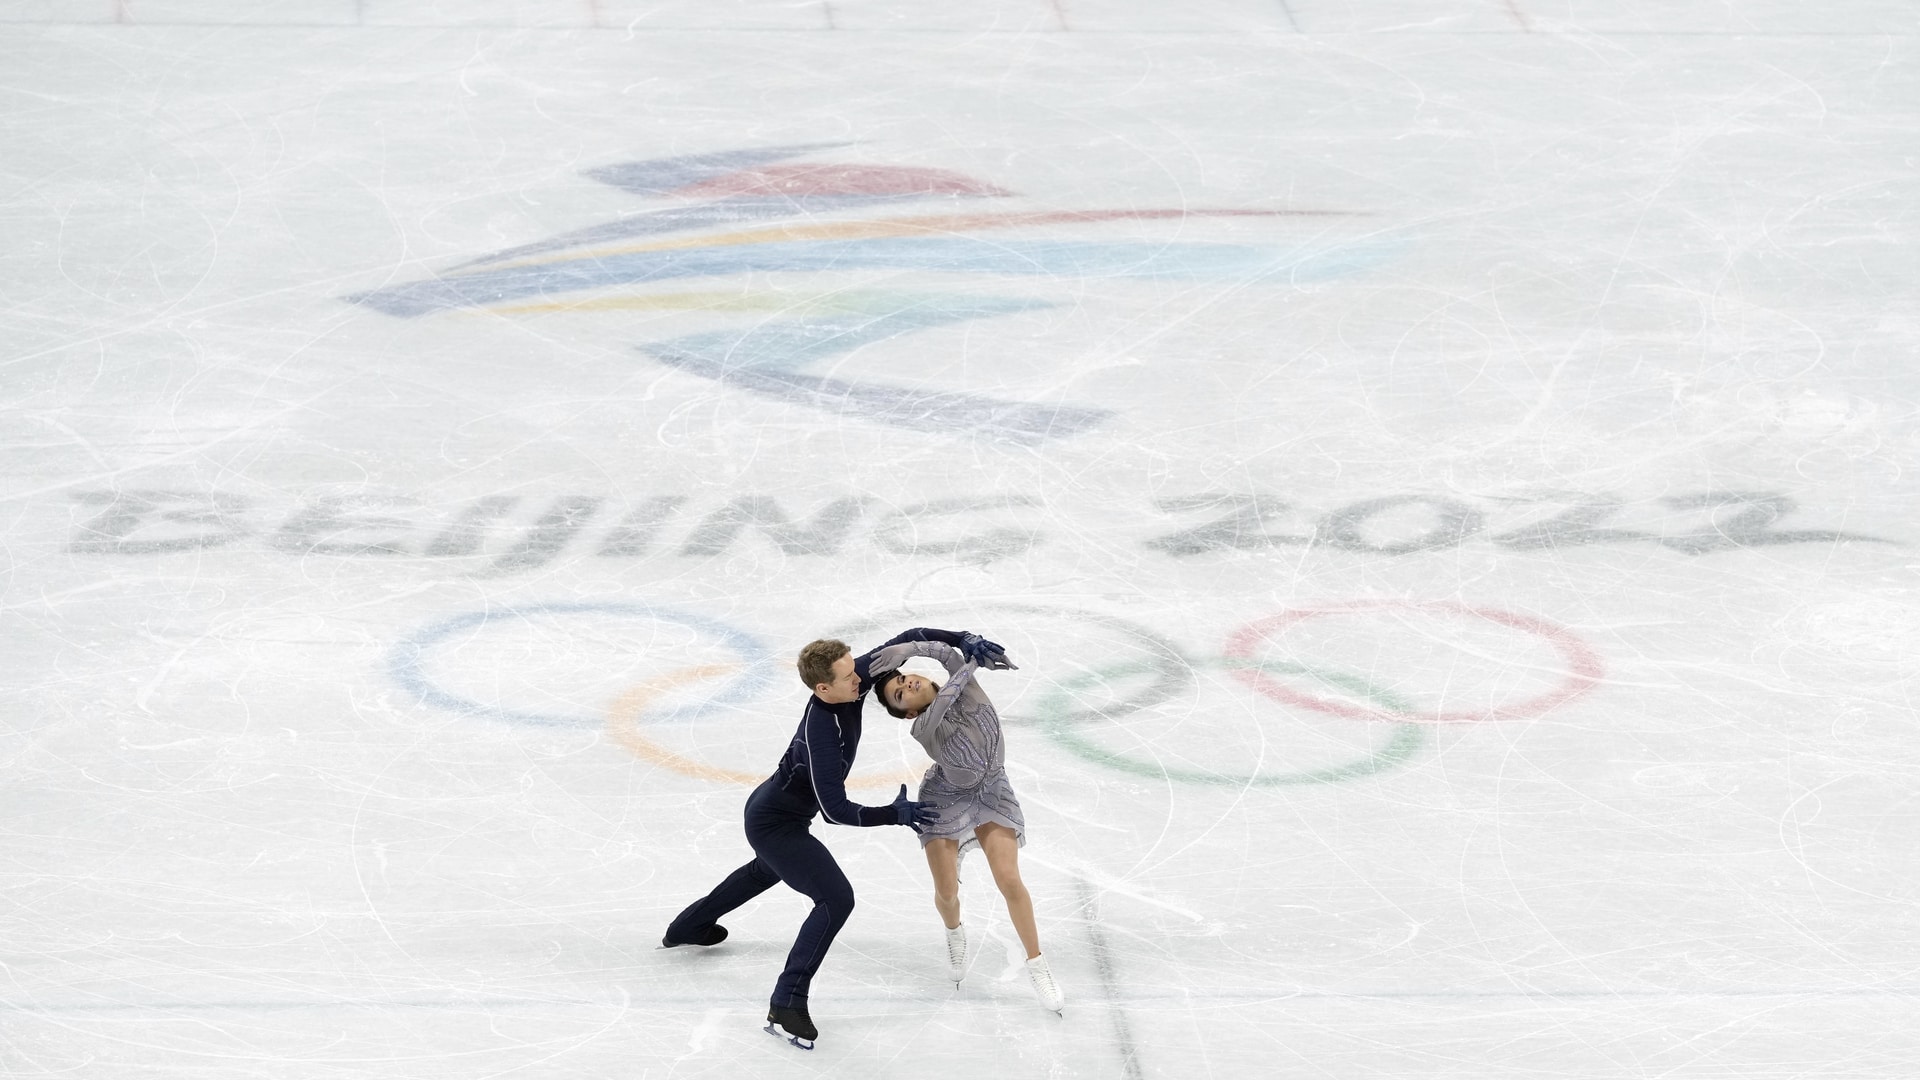 When to Watch Figure Skating Next in the Olympics and Who to Watch For